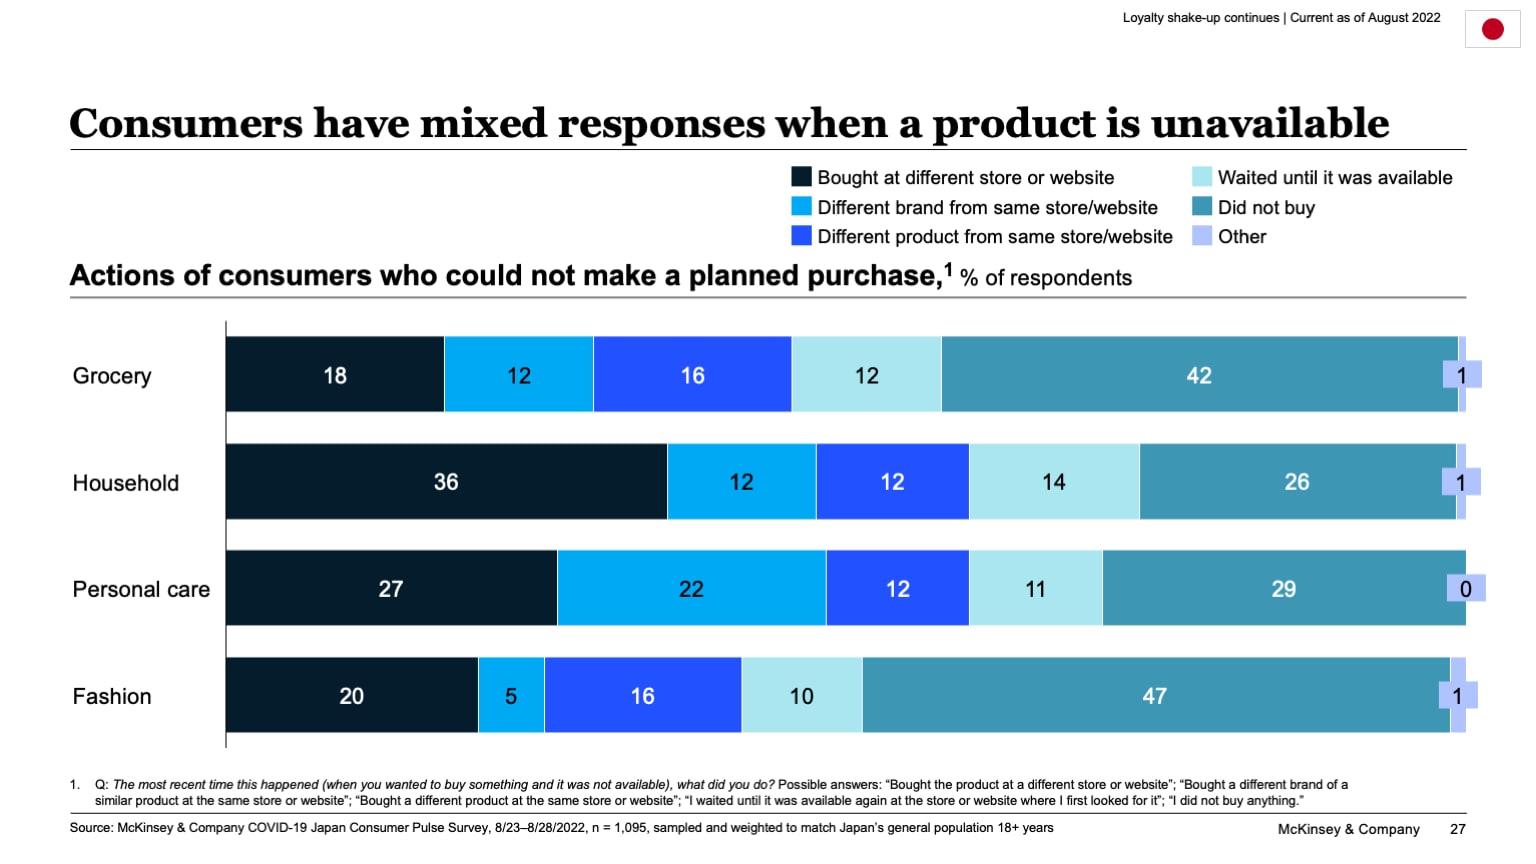 Consumers have mixed responses when a product is unavailable